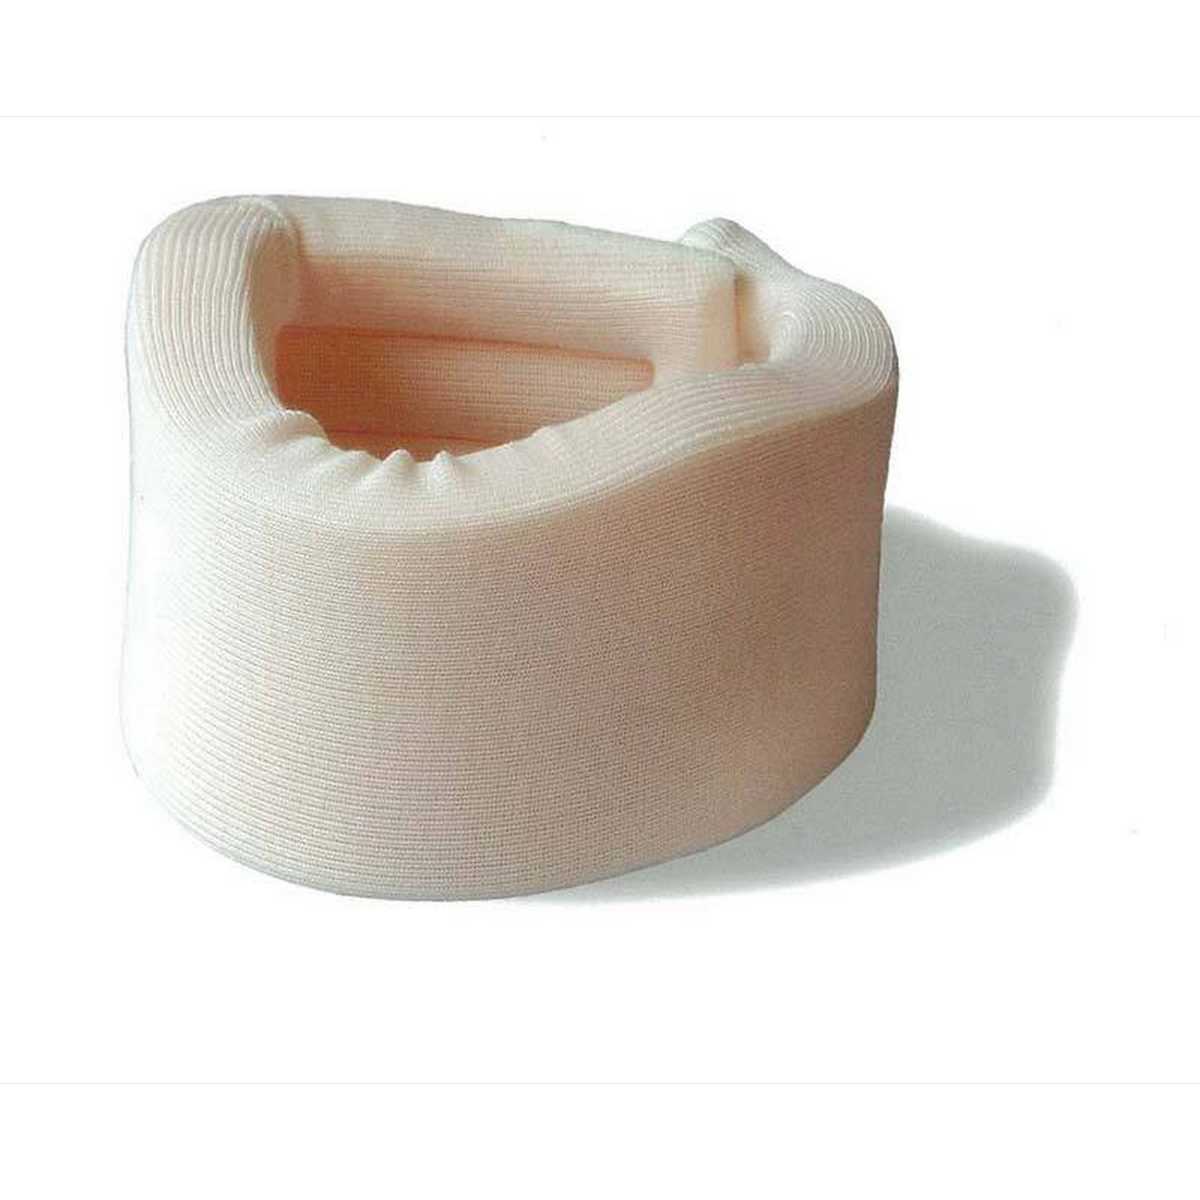 ORTHOSOFT SOFT SPONGE CERVICAL COLLAR - Southern Crescent Malaysia